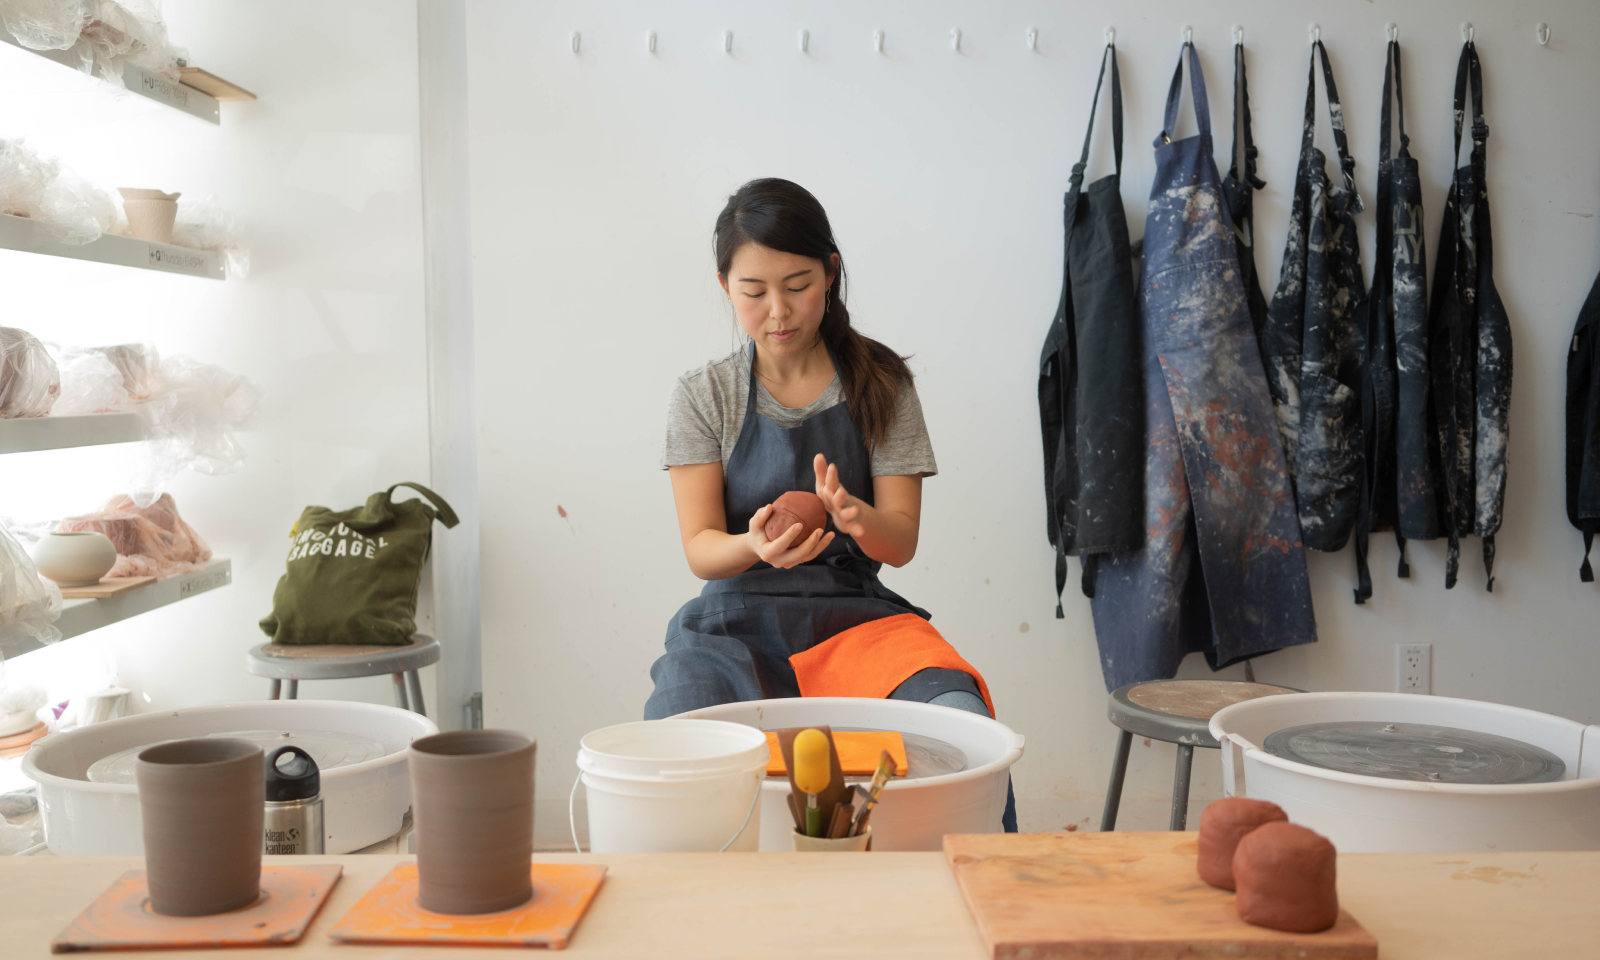 Janice sitting in the center preparing clay for her potters wheel inside a pottery studio.